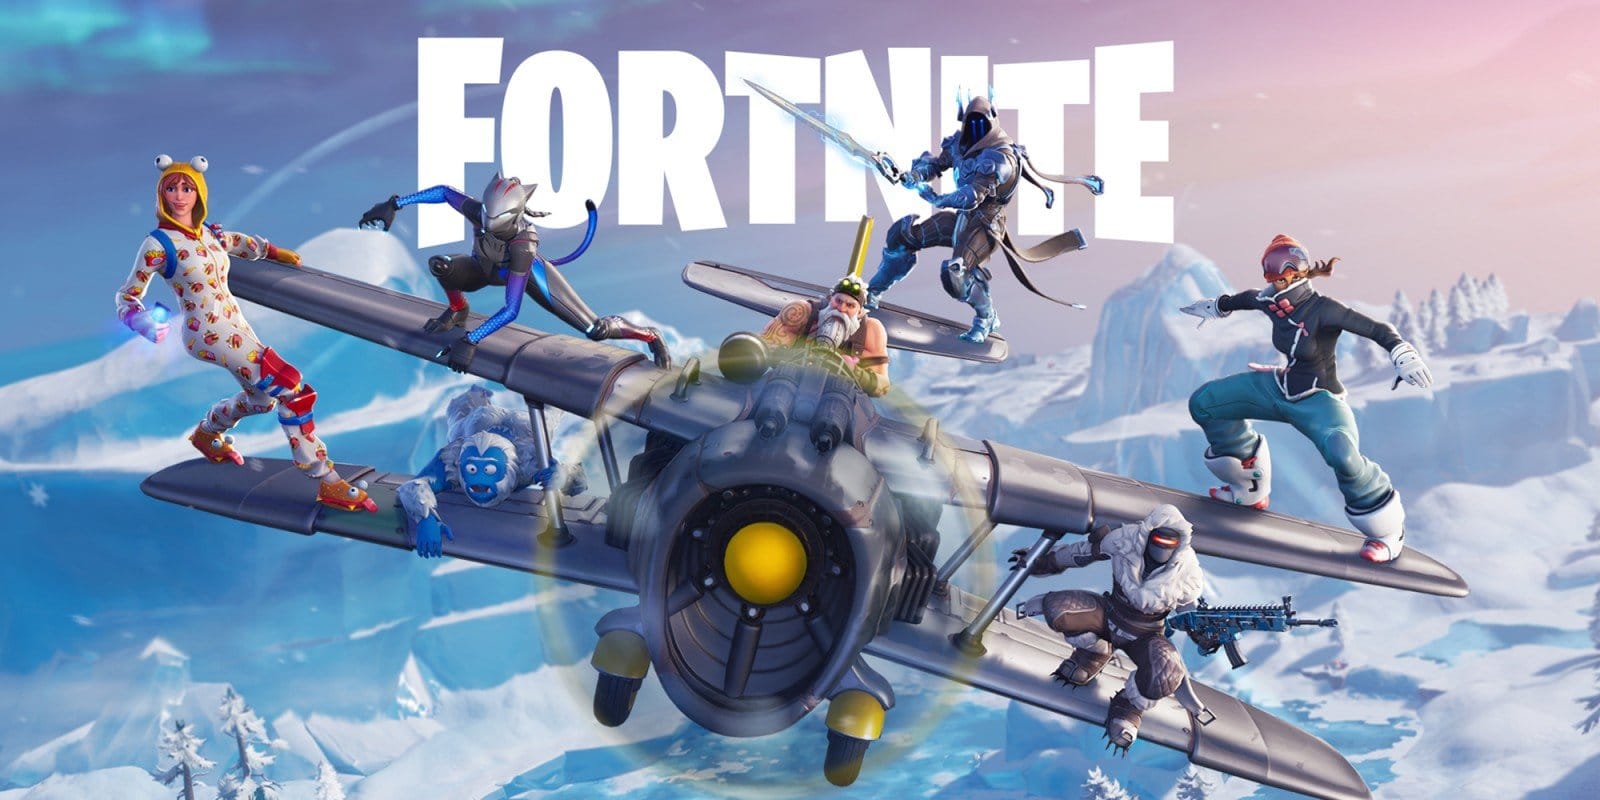 H2x1_NSwitchDS_Fortnite_image1600w